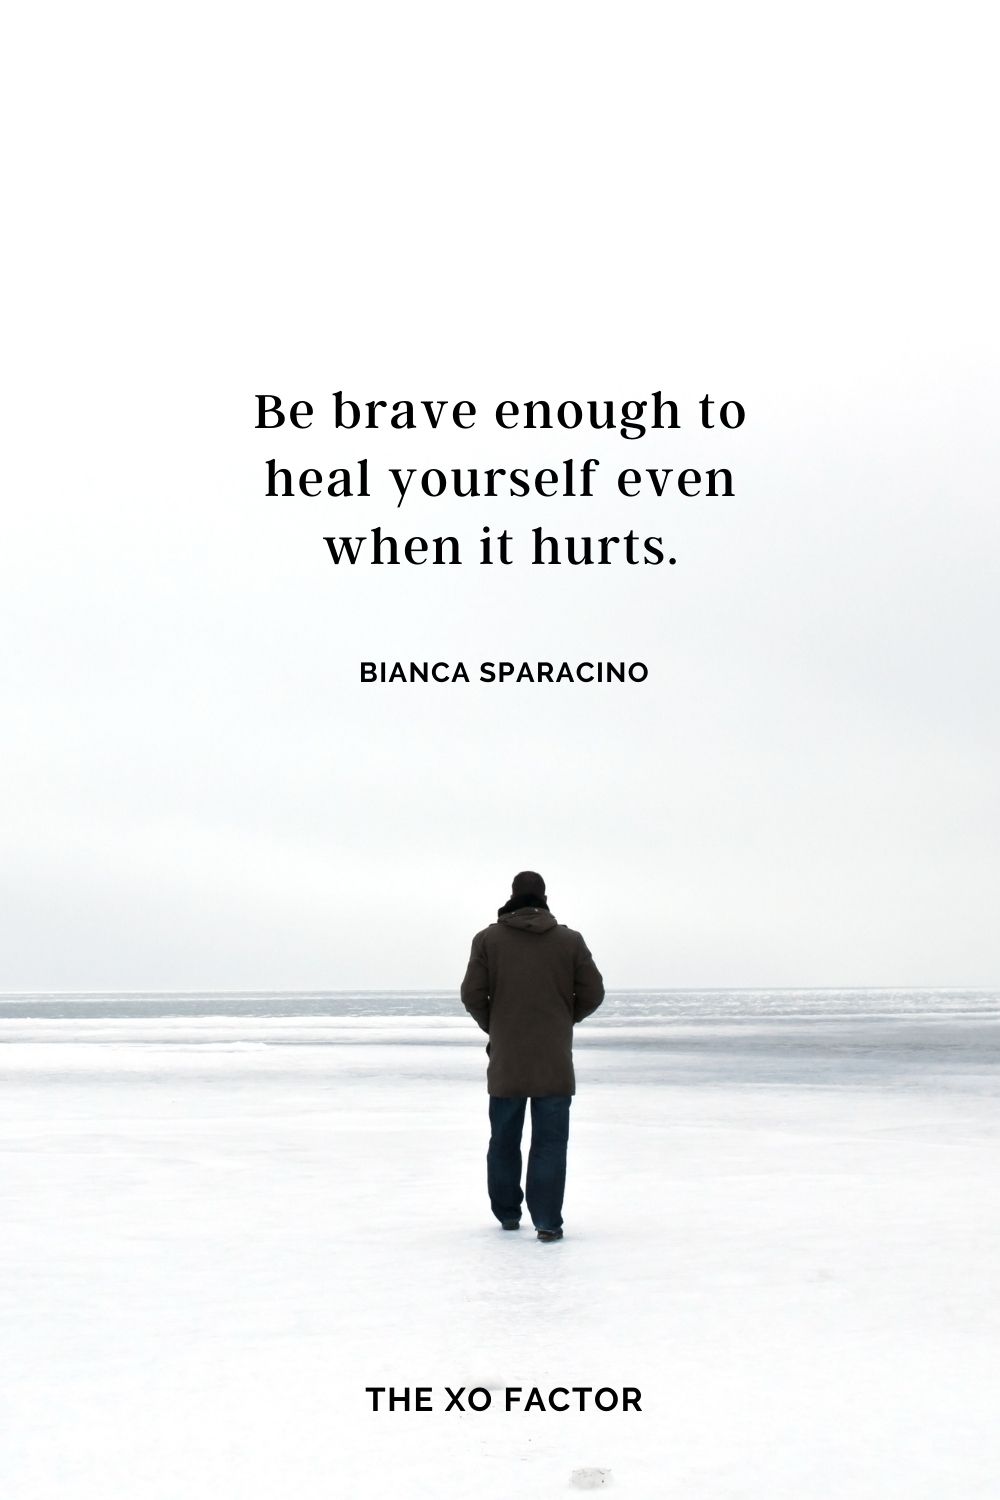 Be brave enough to heal yourself even when it hurts. Bianca Sparacino